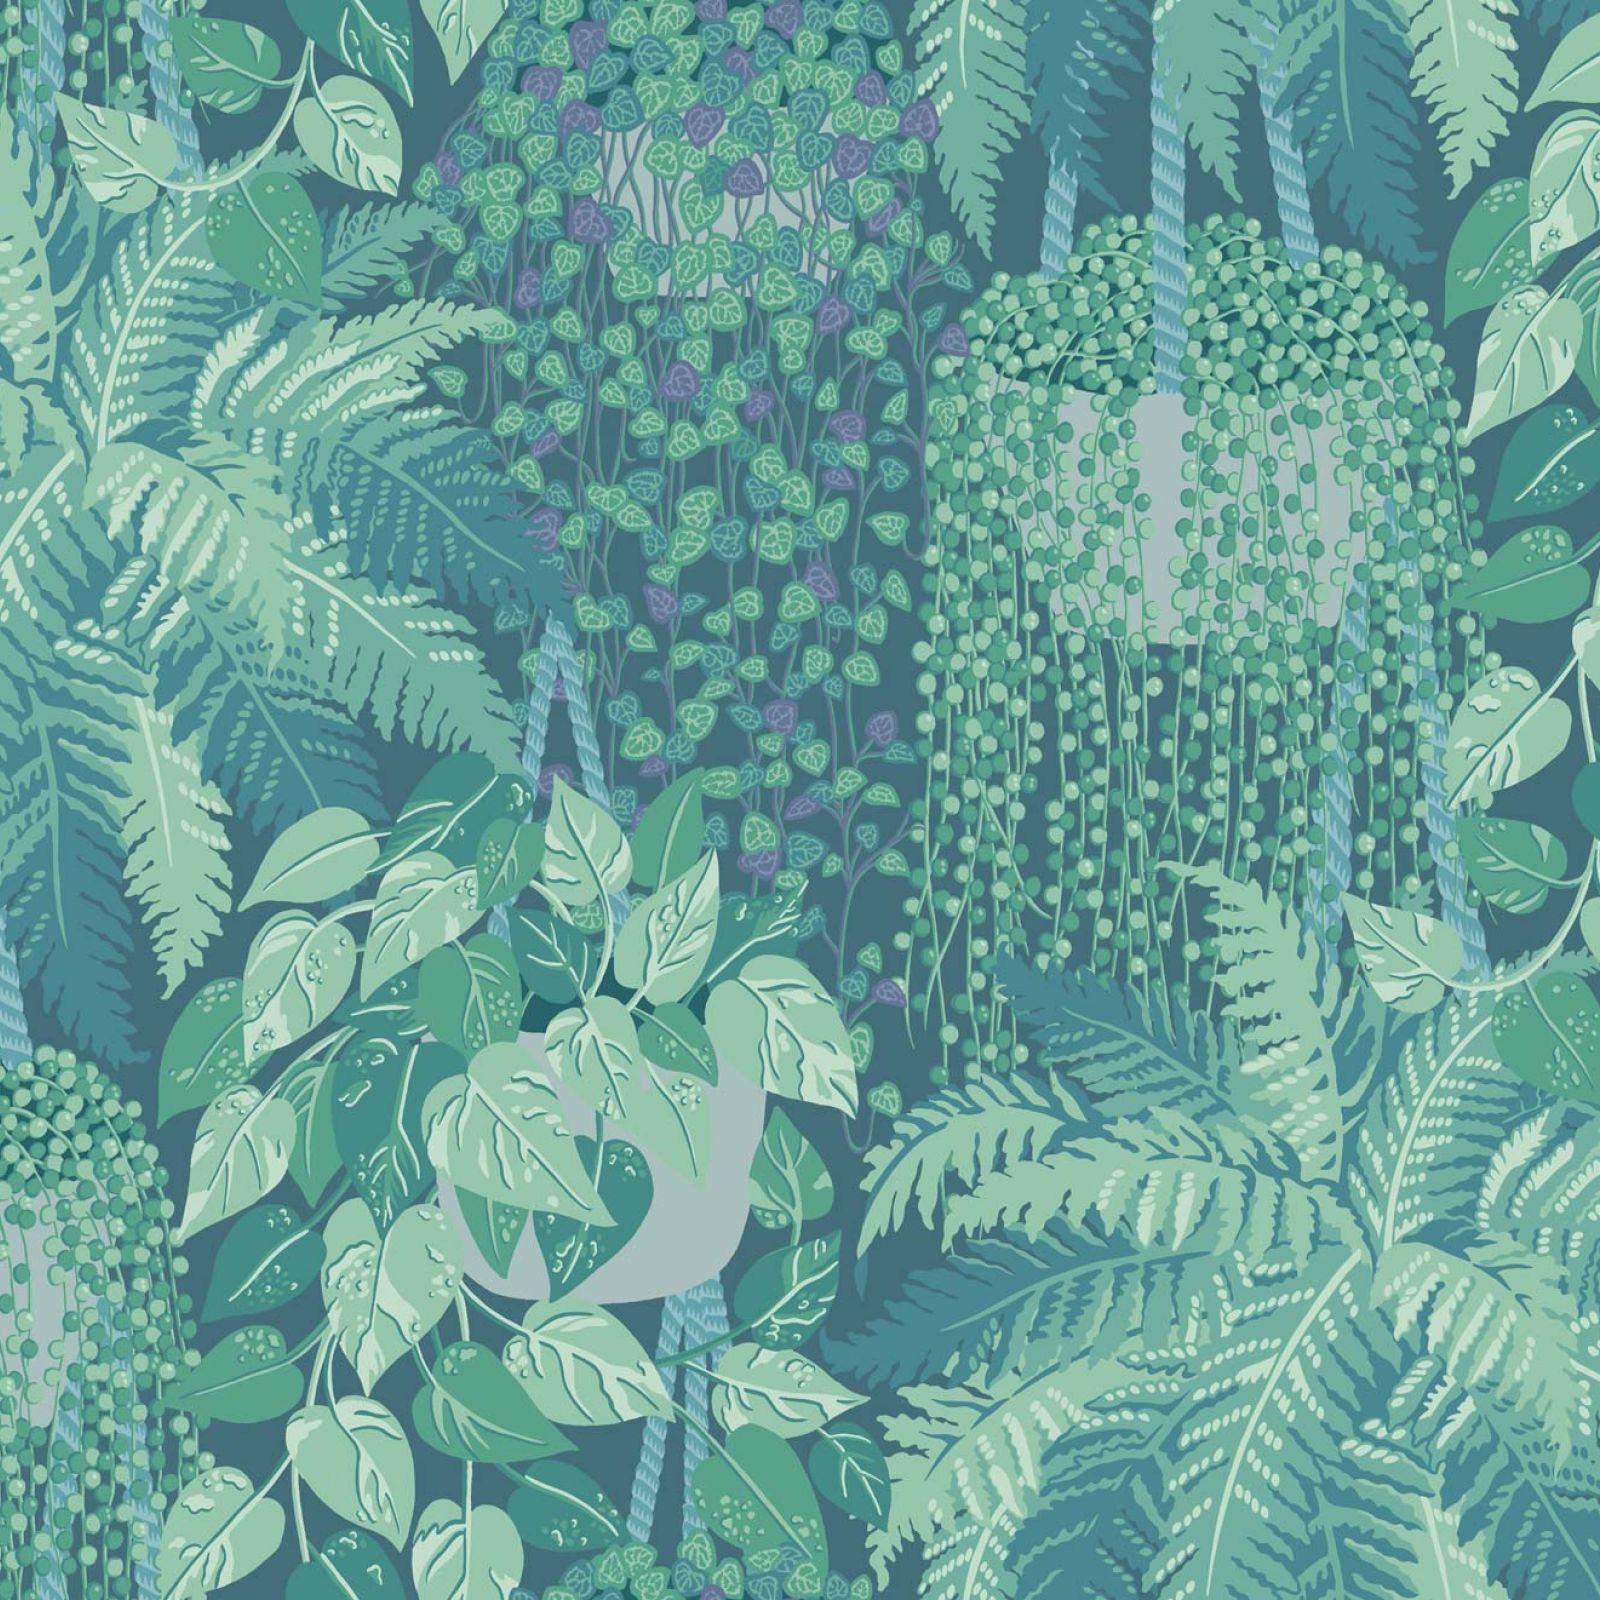 Fern wallpaper in a choice of 2 colourways